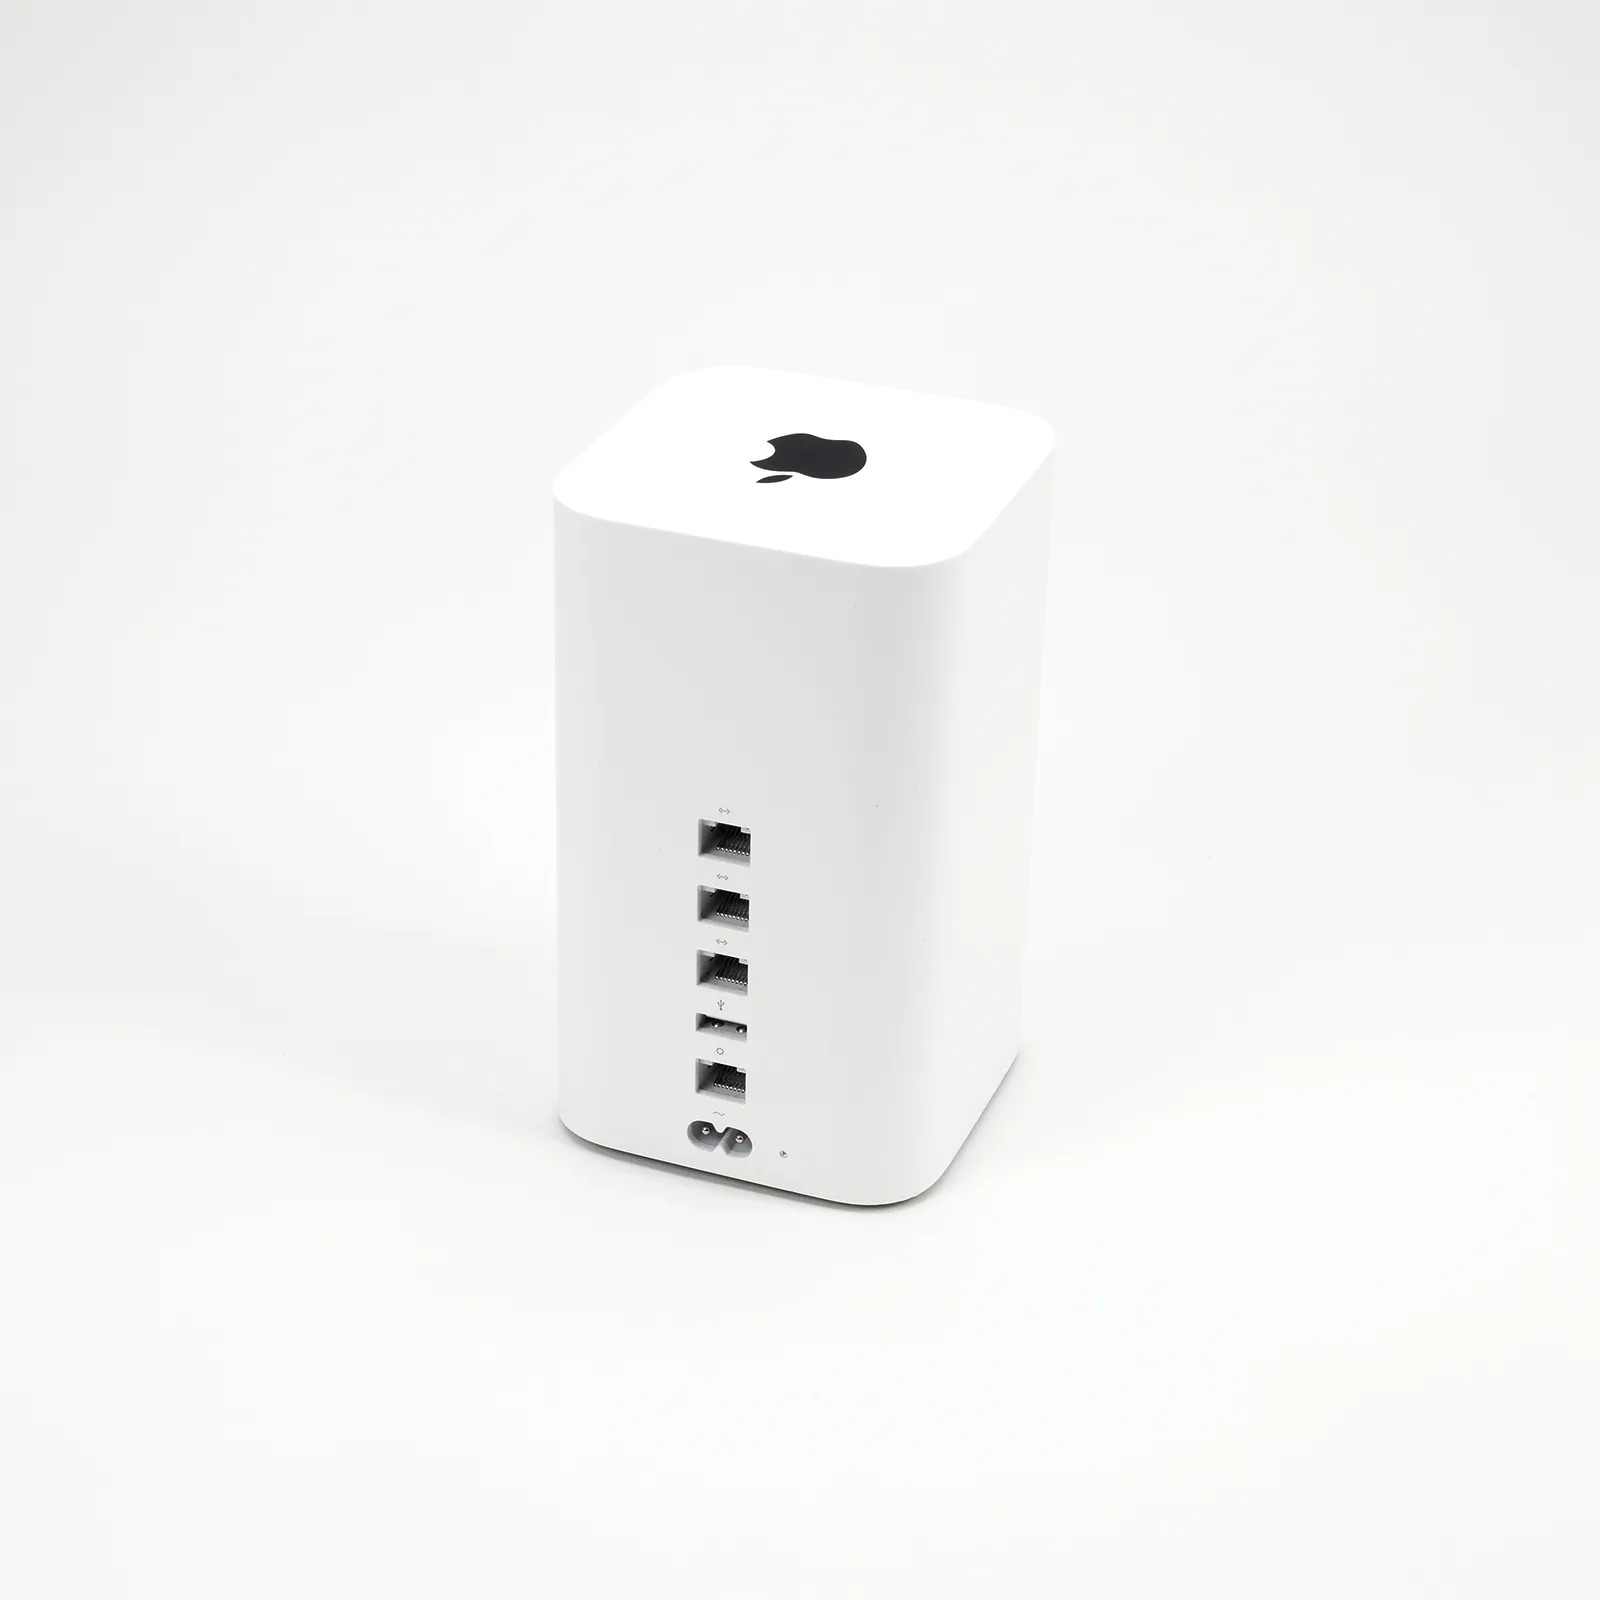 Apple AirPort Time Capsule Router/2TB Backup Device, 5th Generation A1470 Image 1